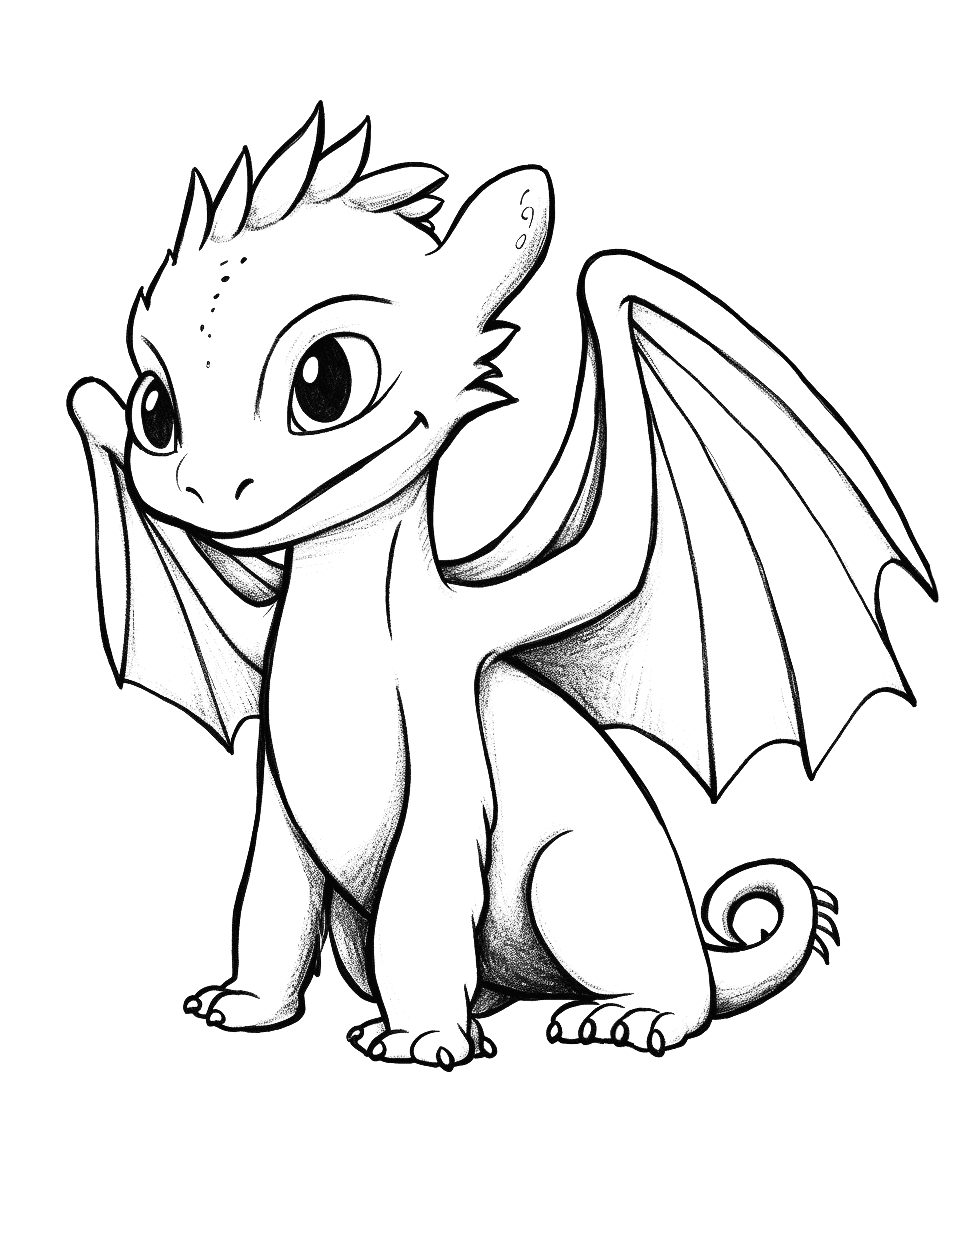 Toothless Dragon Coloring Page - Toothless the Night Fury sharing a playful moment.